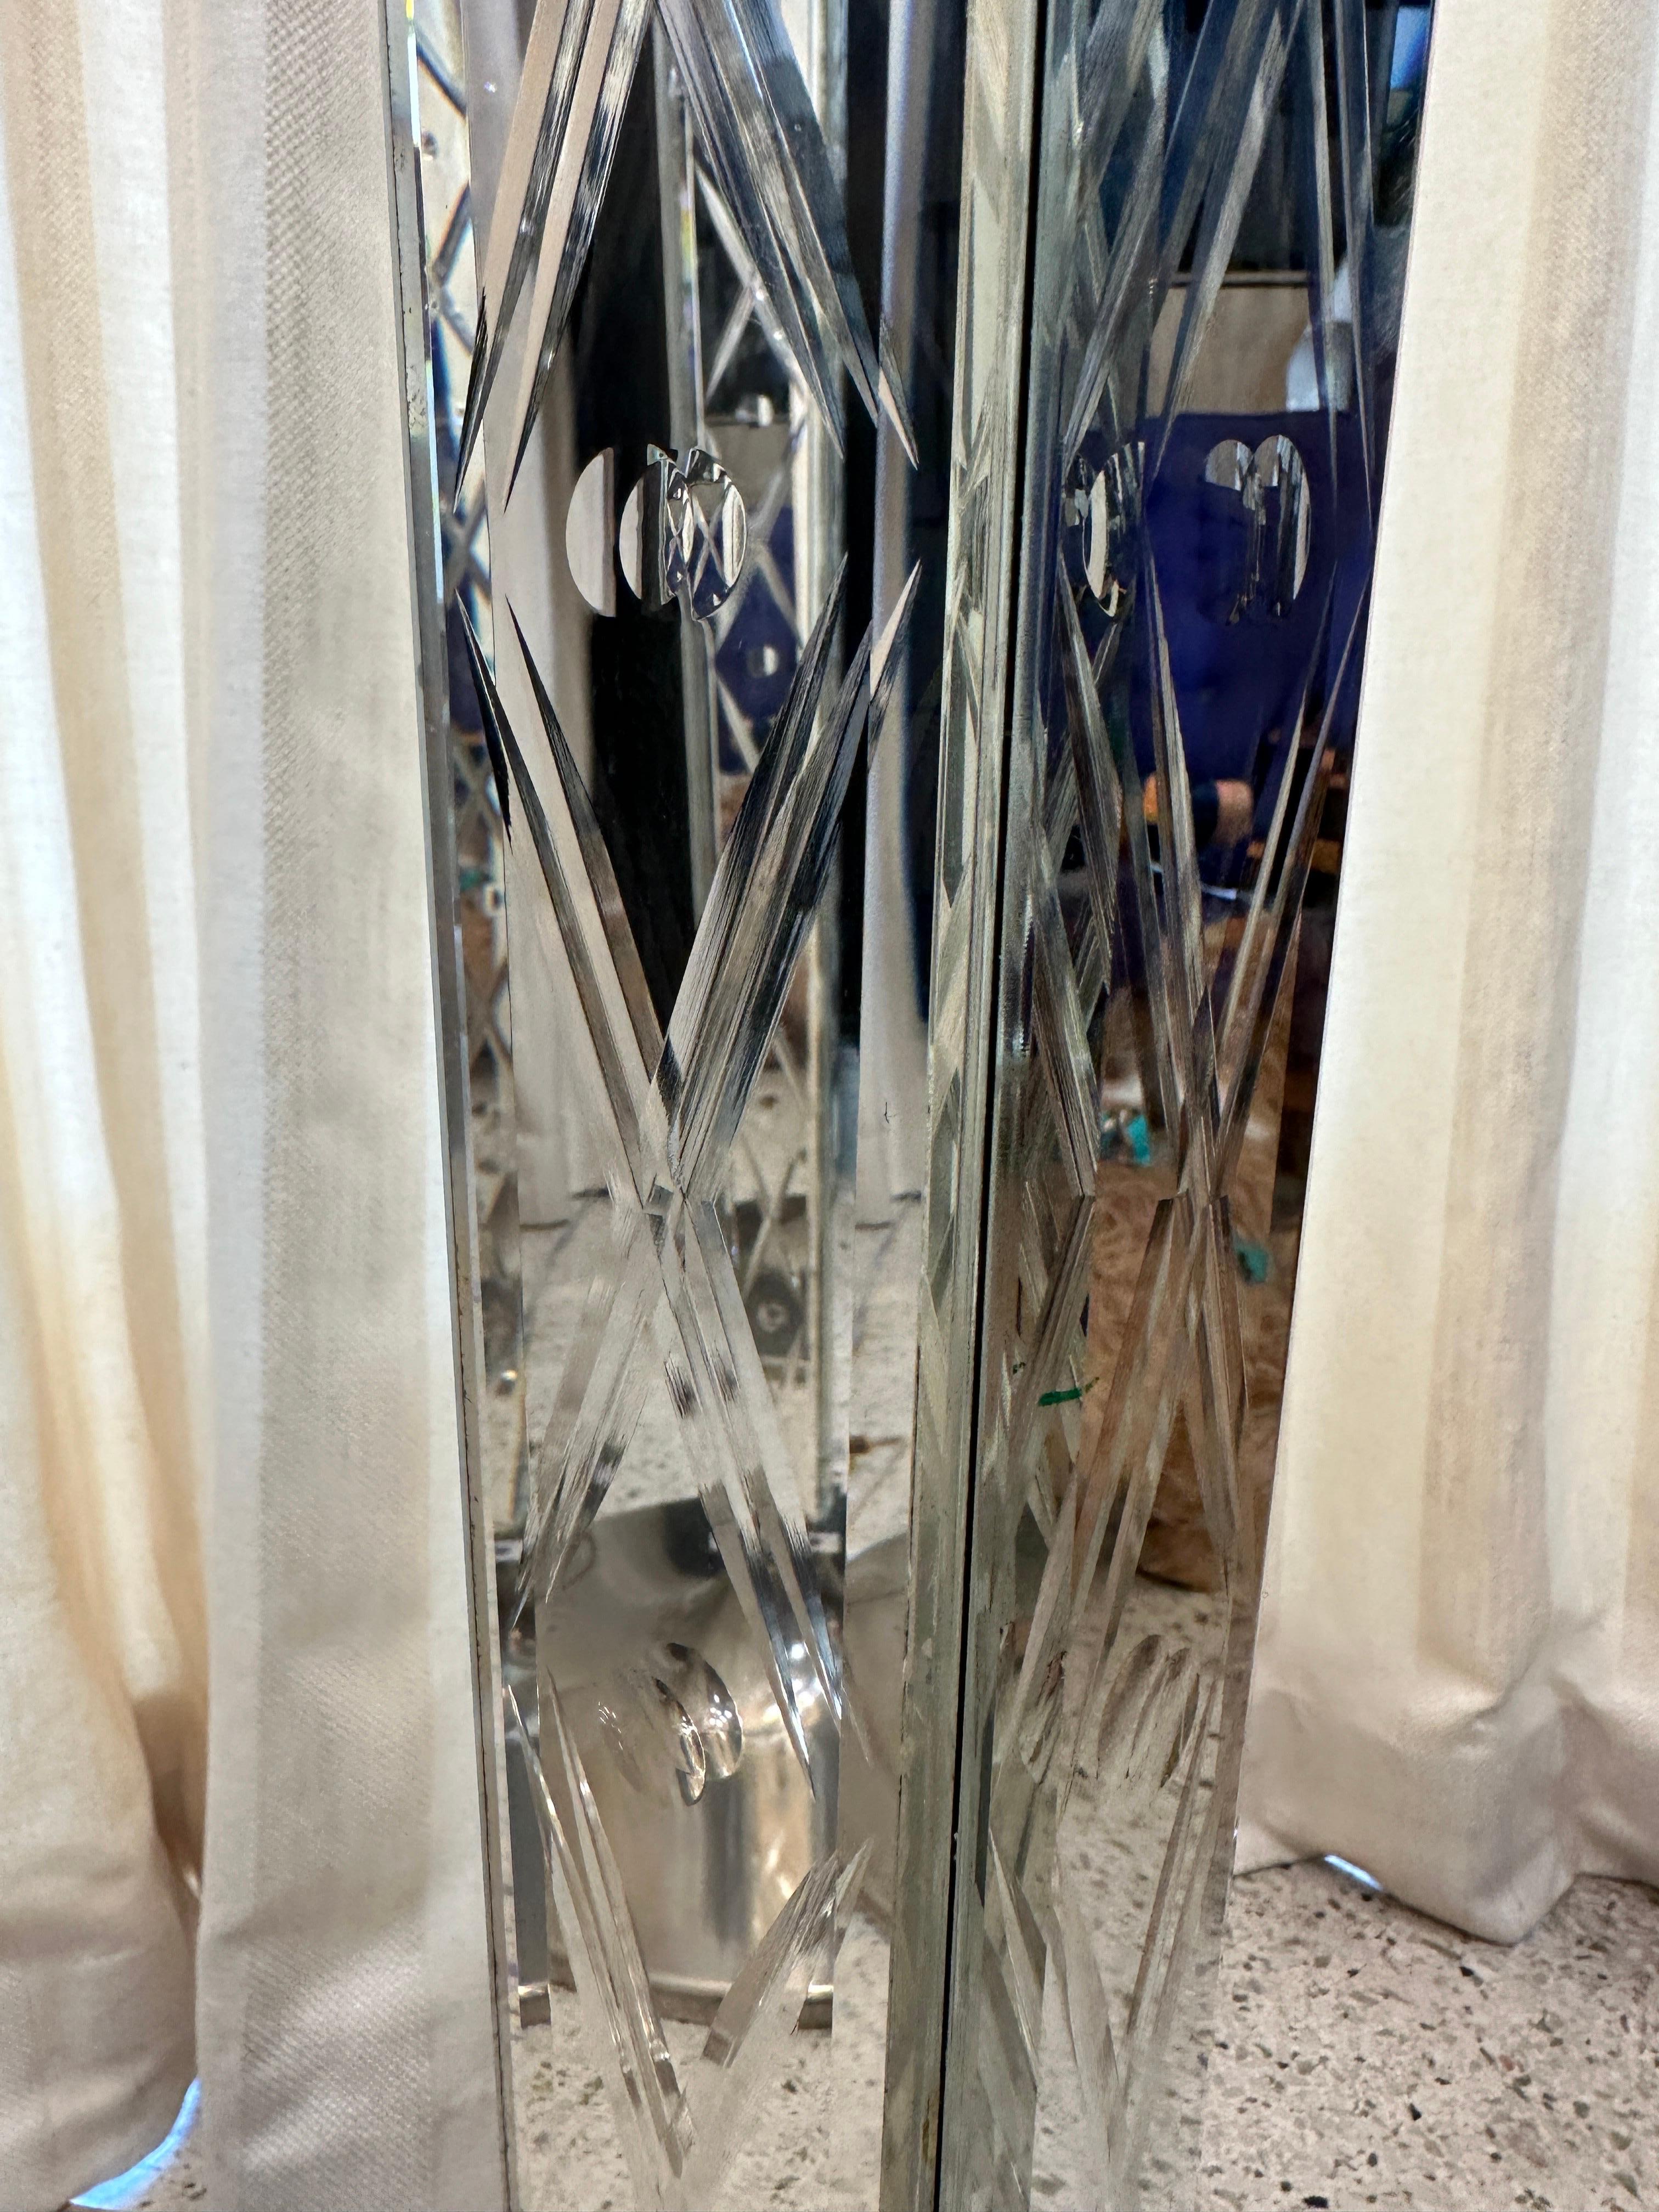 RARE Pair of Philippe Starck Mirror Floor-Lamps - Delano Hotel South Beach For Sale 4